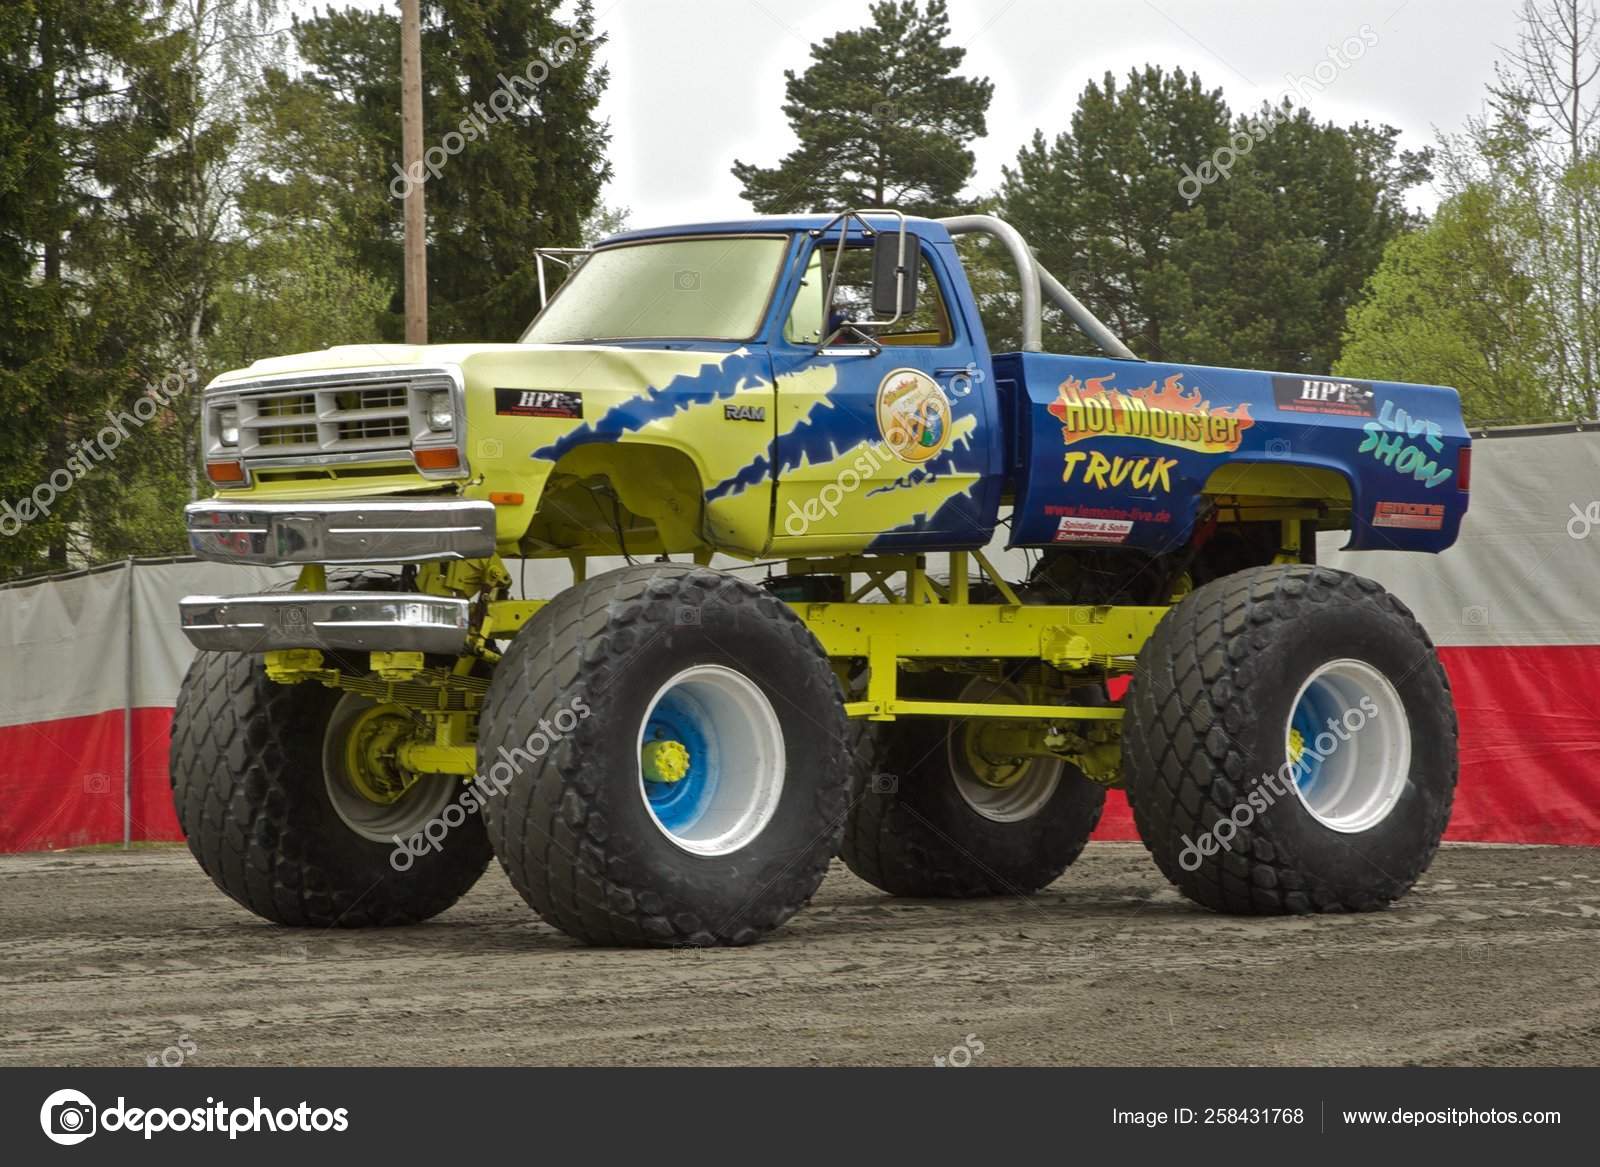 Monster truck Stock Photos, Royalty Free Monster truck Images |  Depositphotos